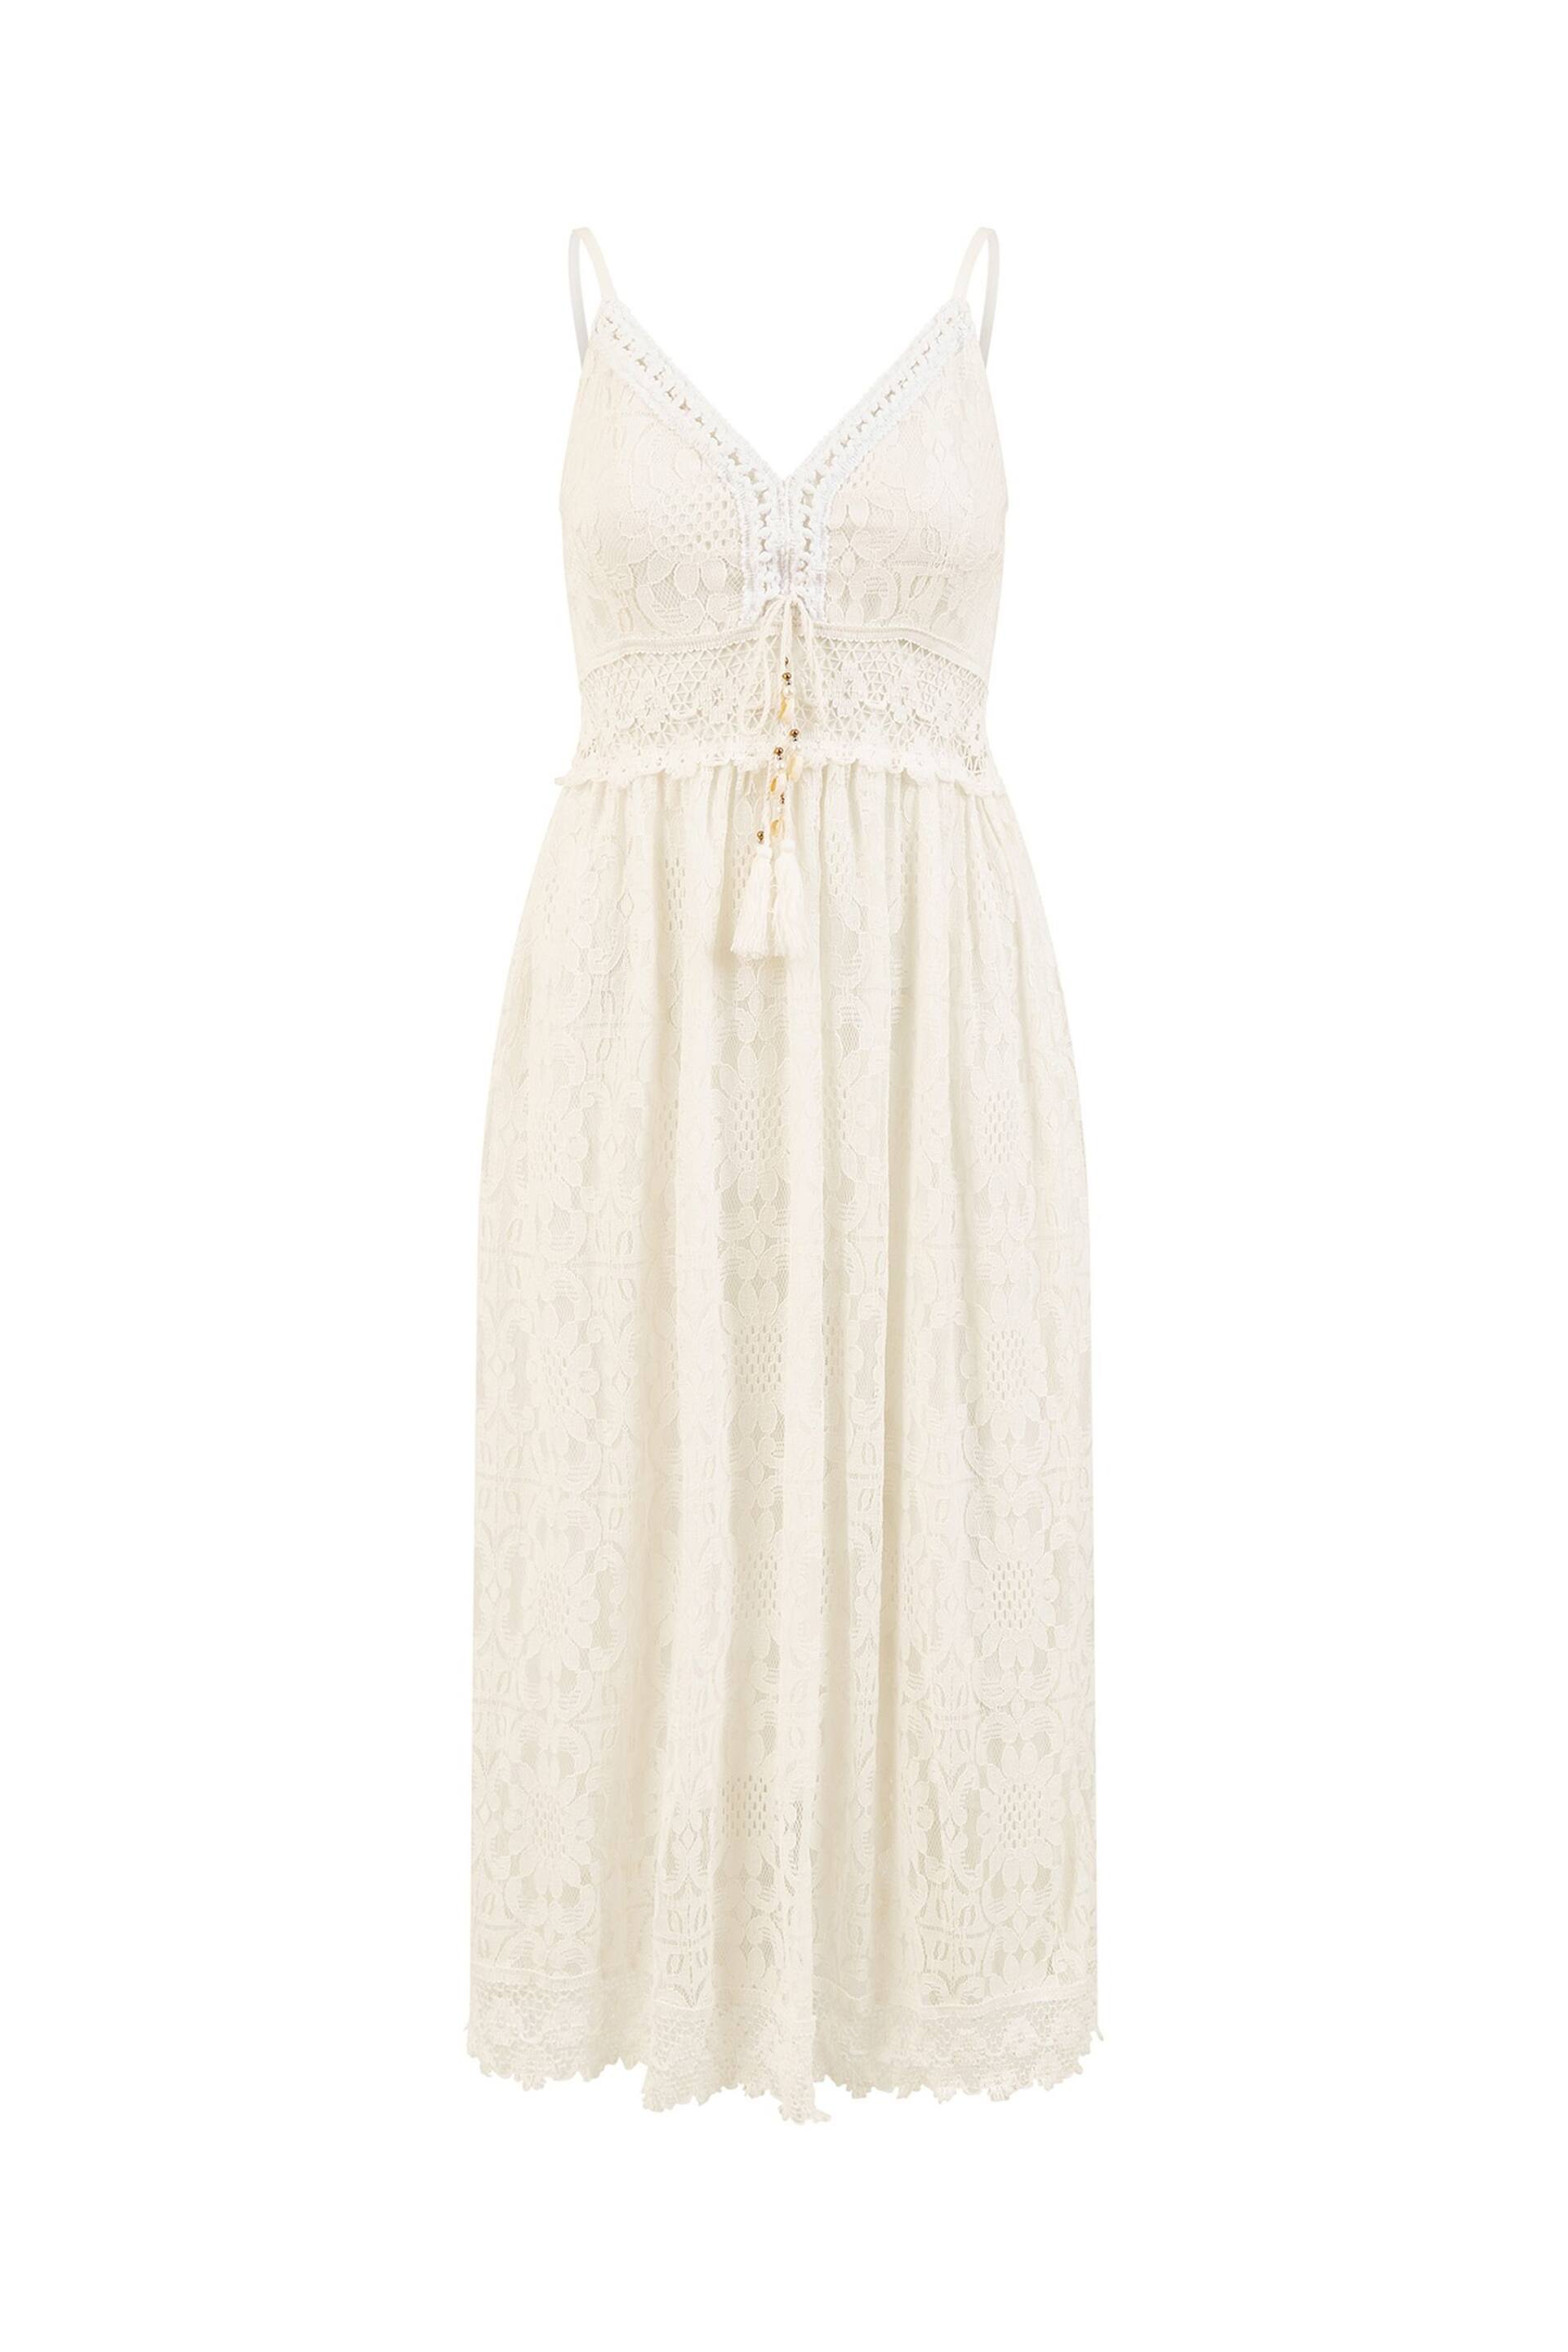 Yumi White Lace Midi Sundress With Tassel Tie and Ruched Back - Image 5 of 5